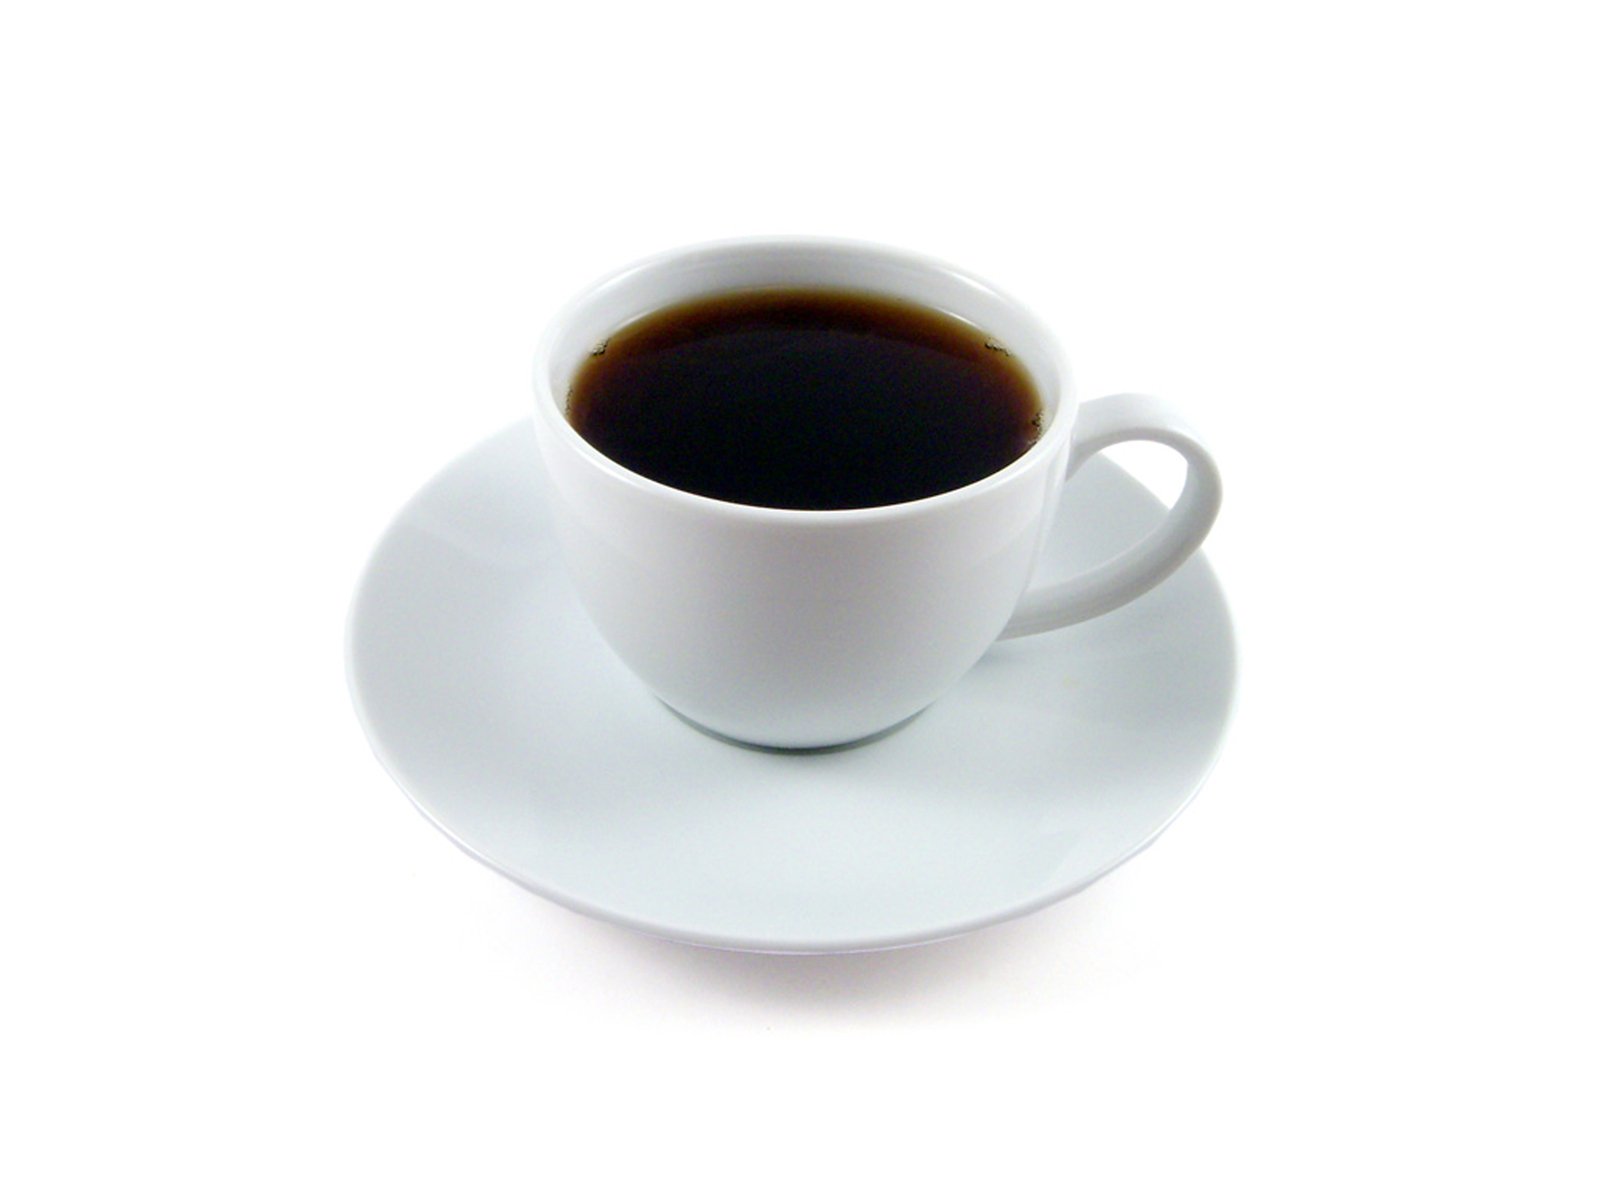 coffee is on a saucer that sits in the middle of a white plate